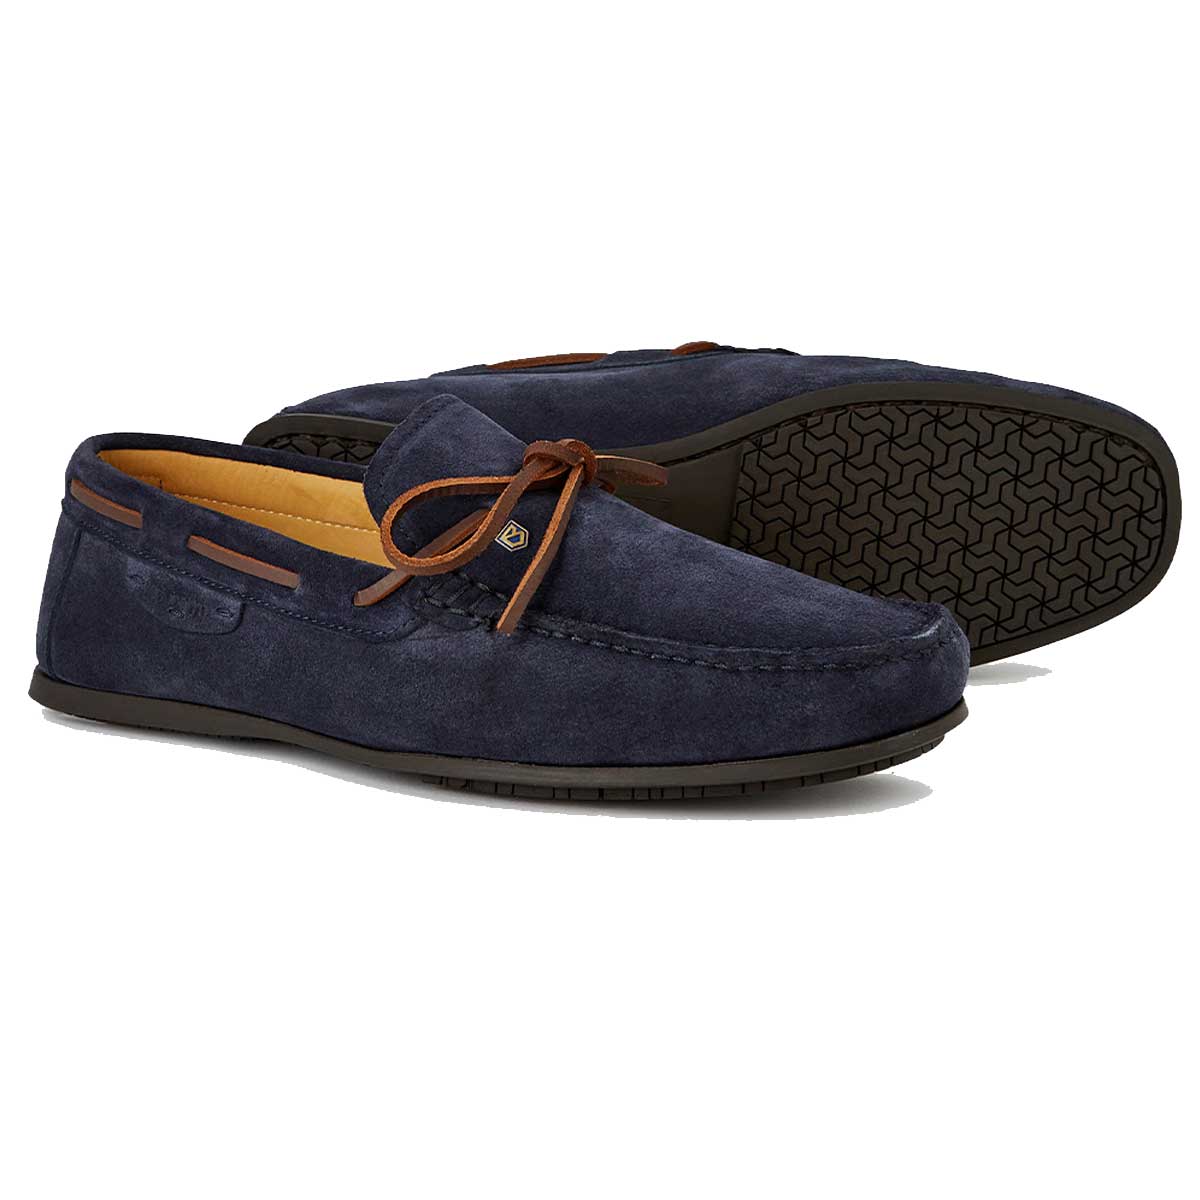 DUBARRY Shearwater Loafer - Men's - French Navy